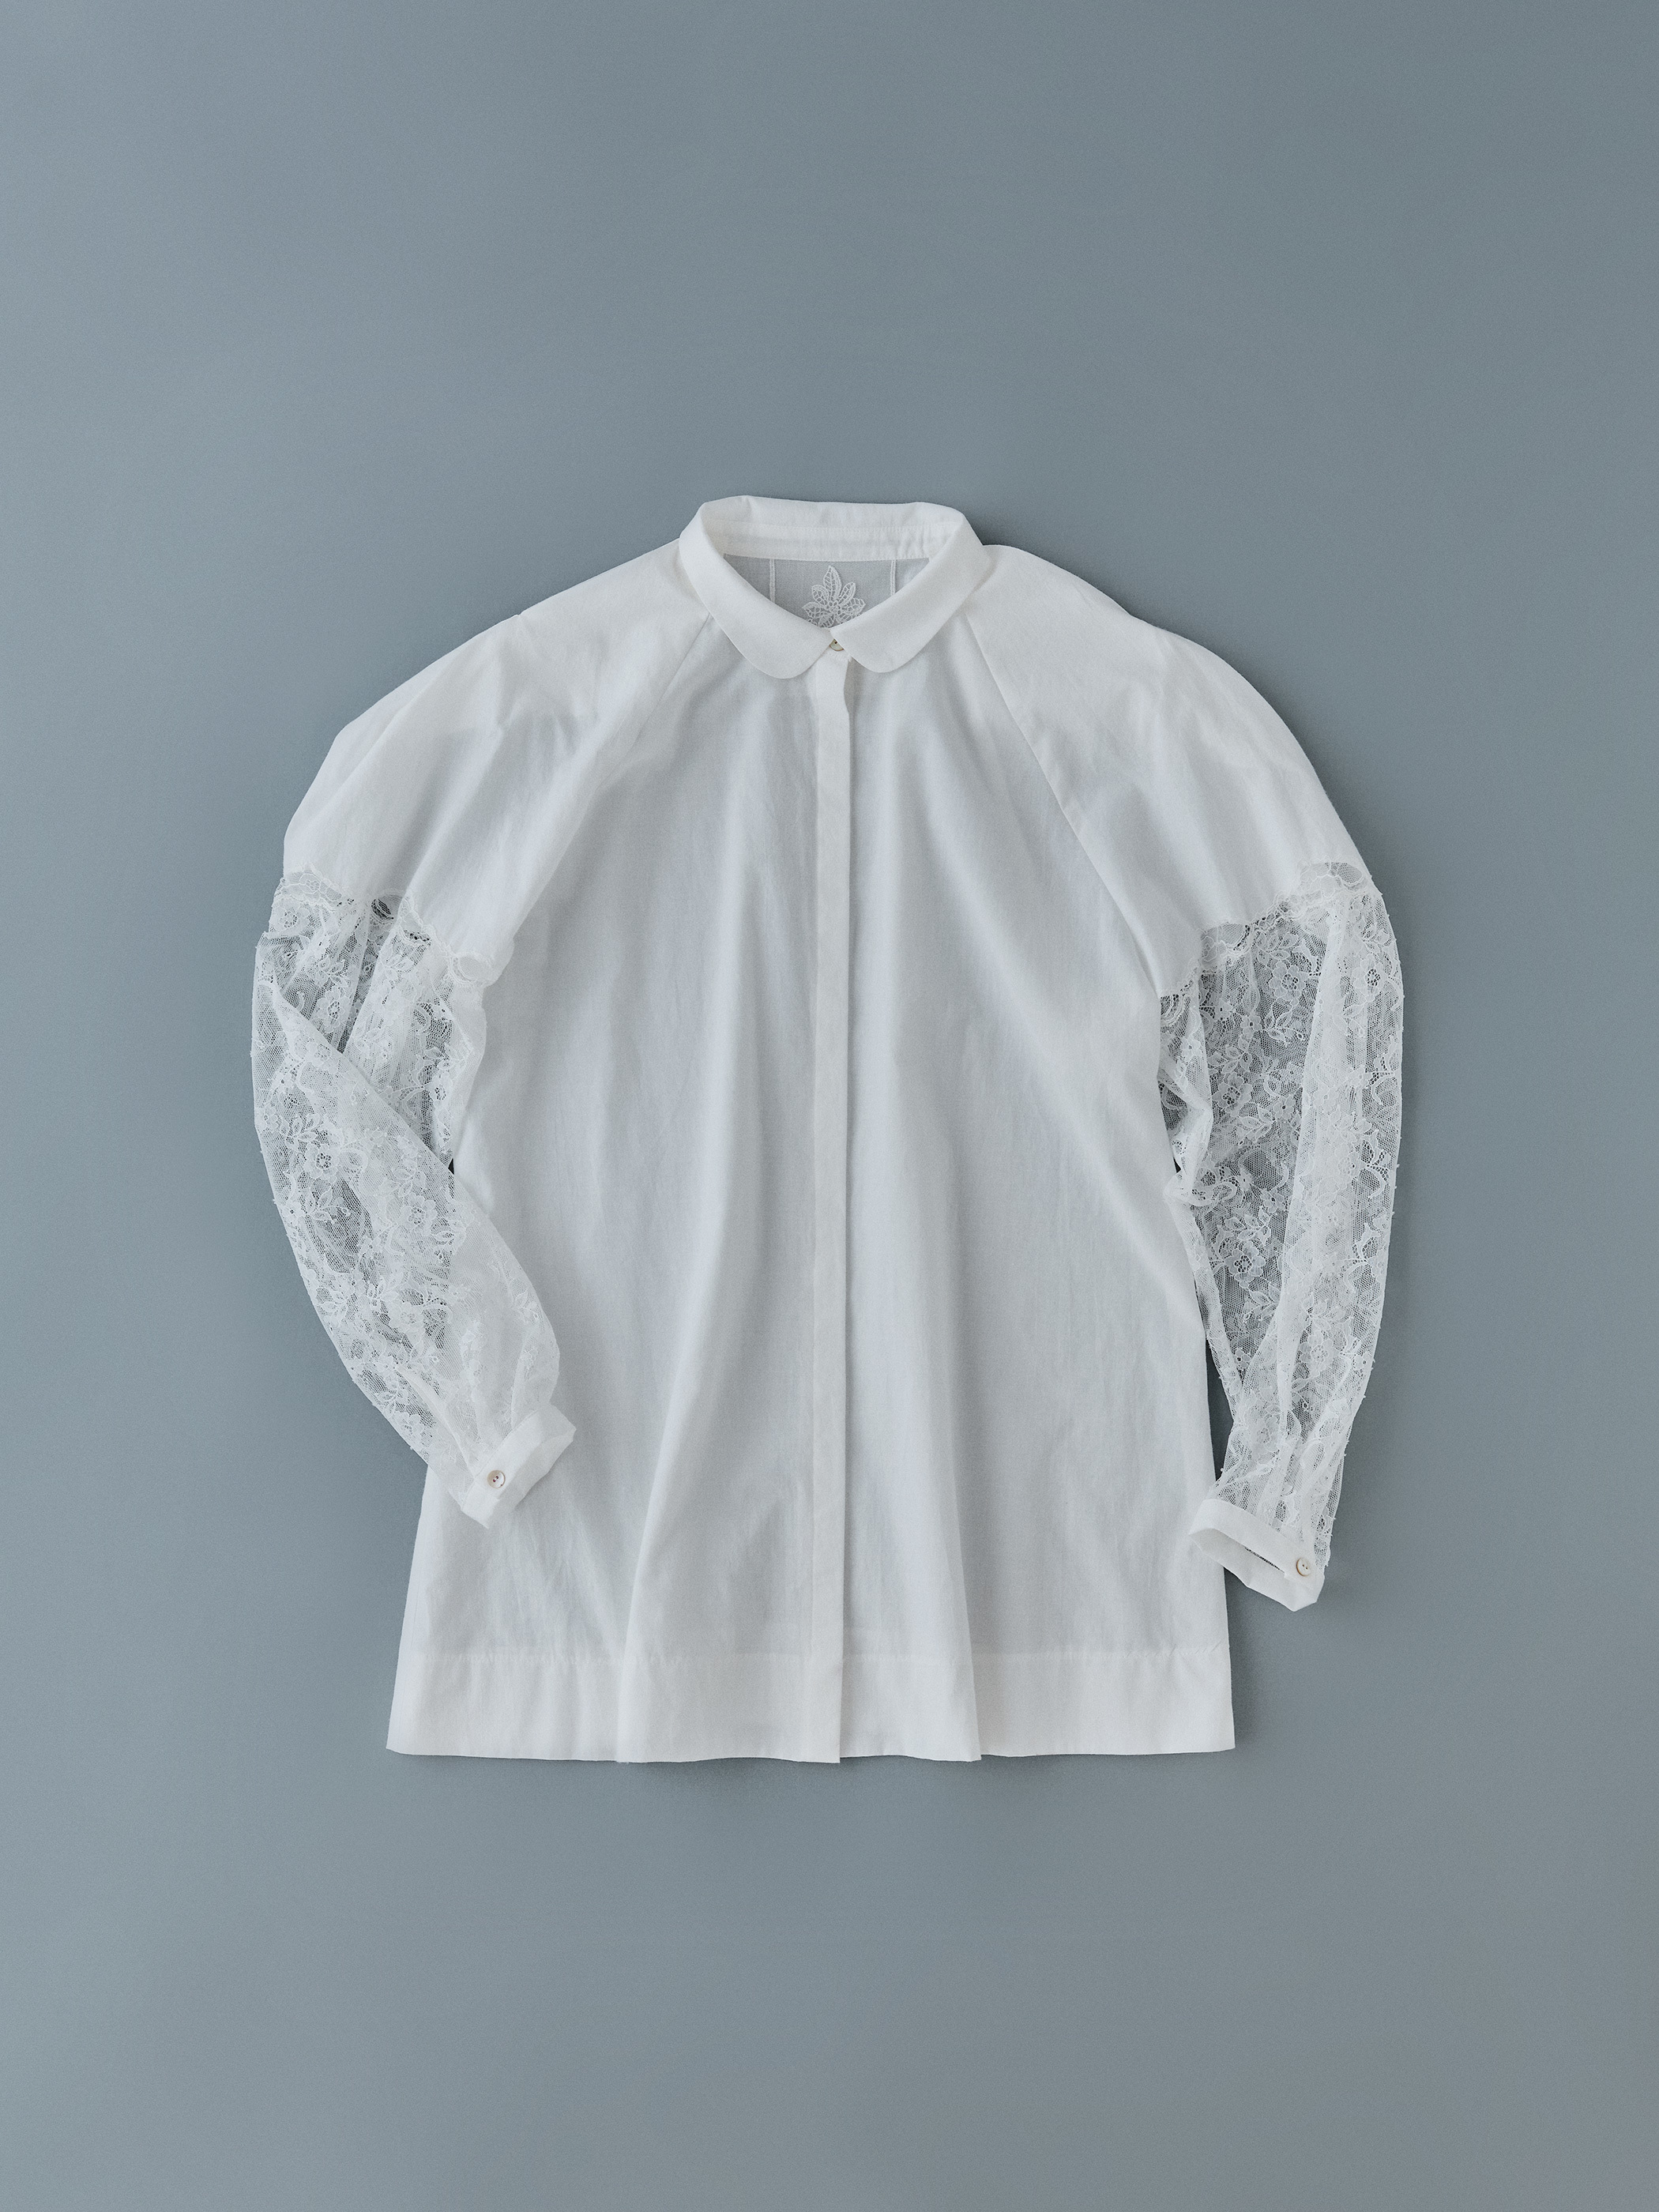 lace blouse - overlace